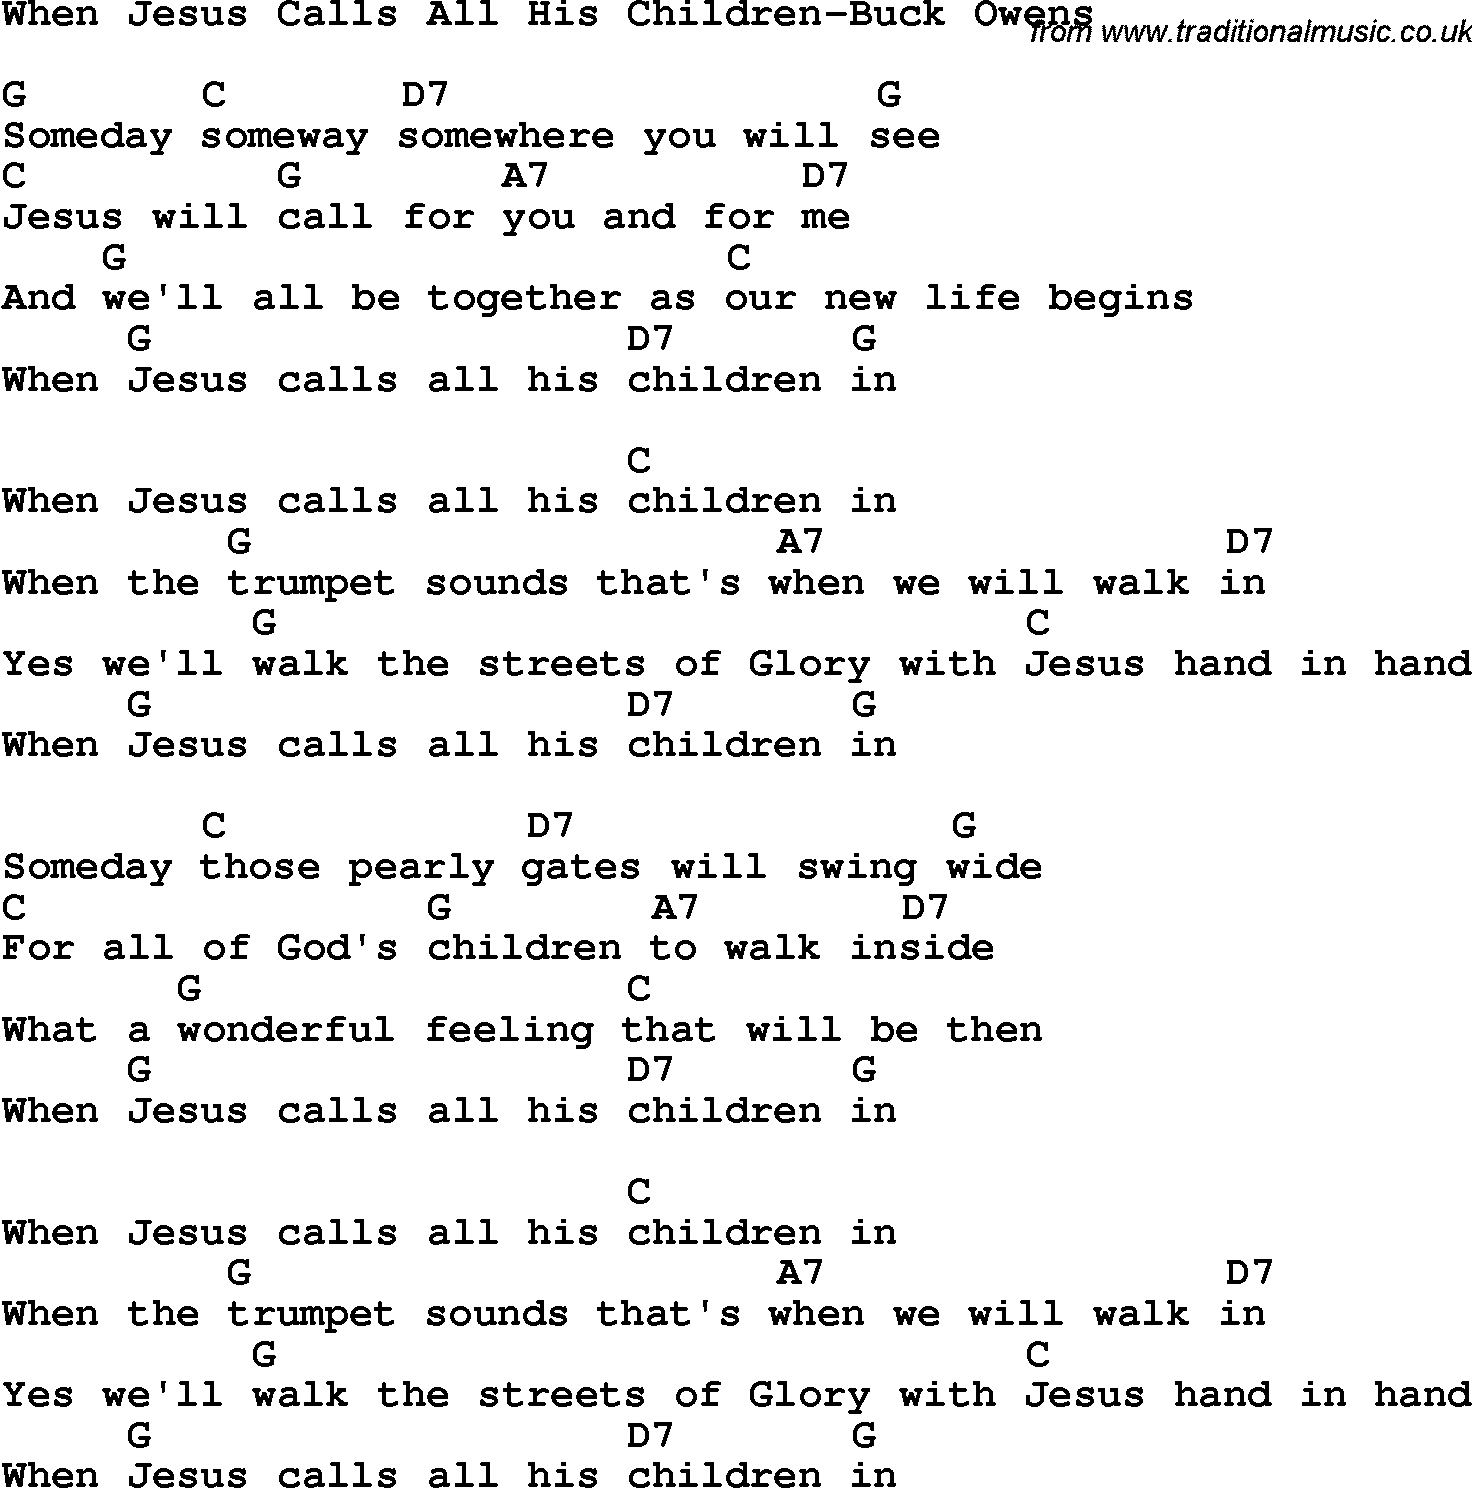 Country, Southern and Bluegrass Gospel Song When Jesus Calls All His Children-Buck Owens lyrics and chords